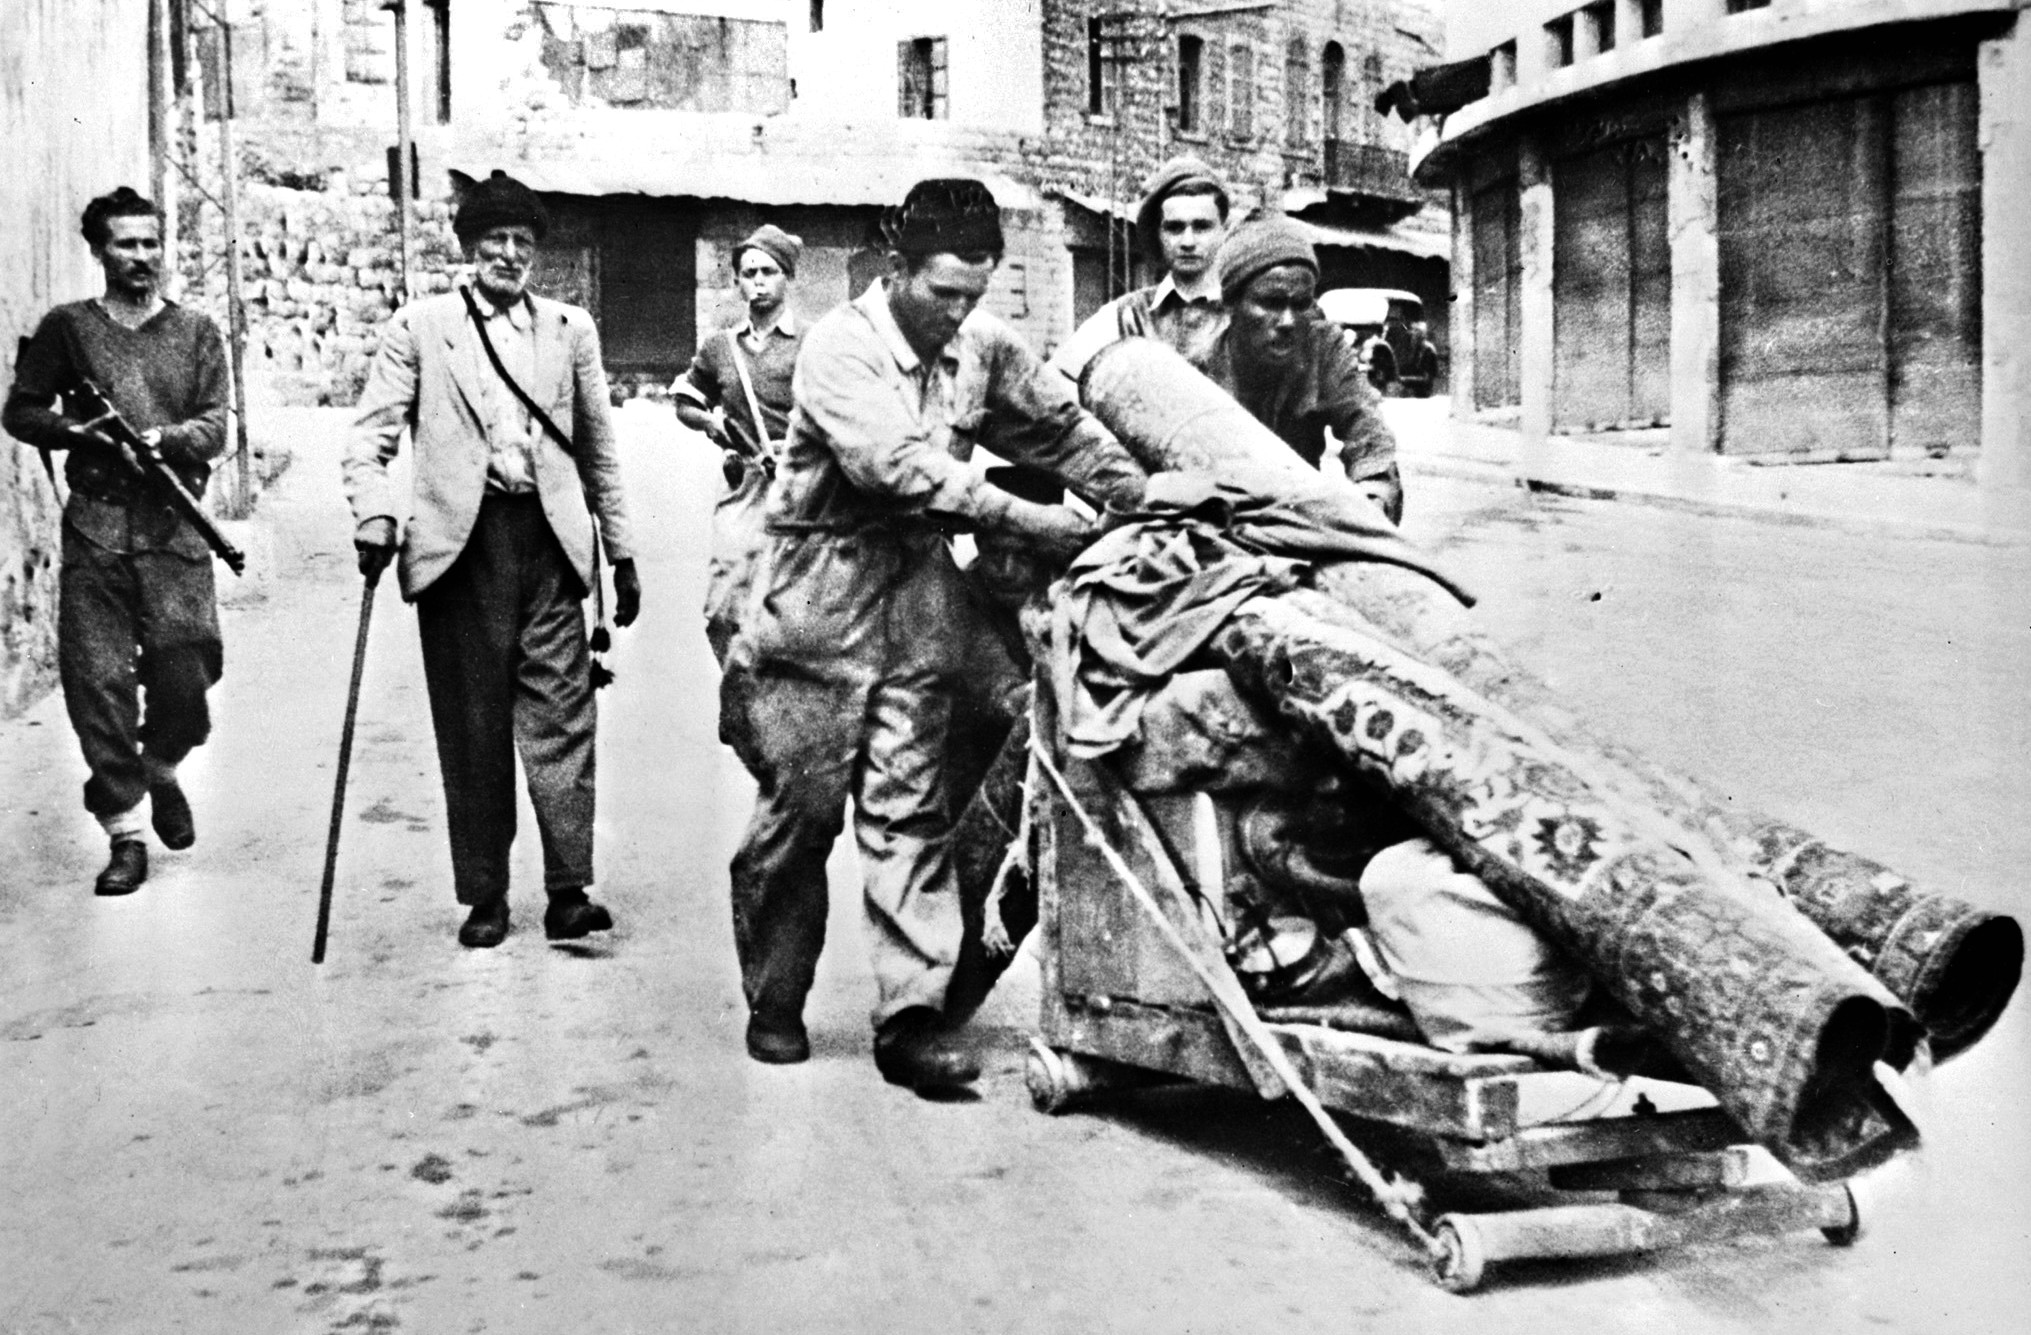 Members of the Haganah paramilitary escort Palestinians expelled from Haifa after Jewish forces took control in April 1948 (AFP/File photo)